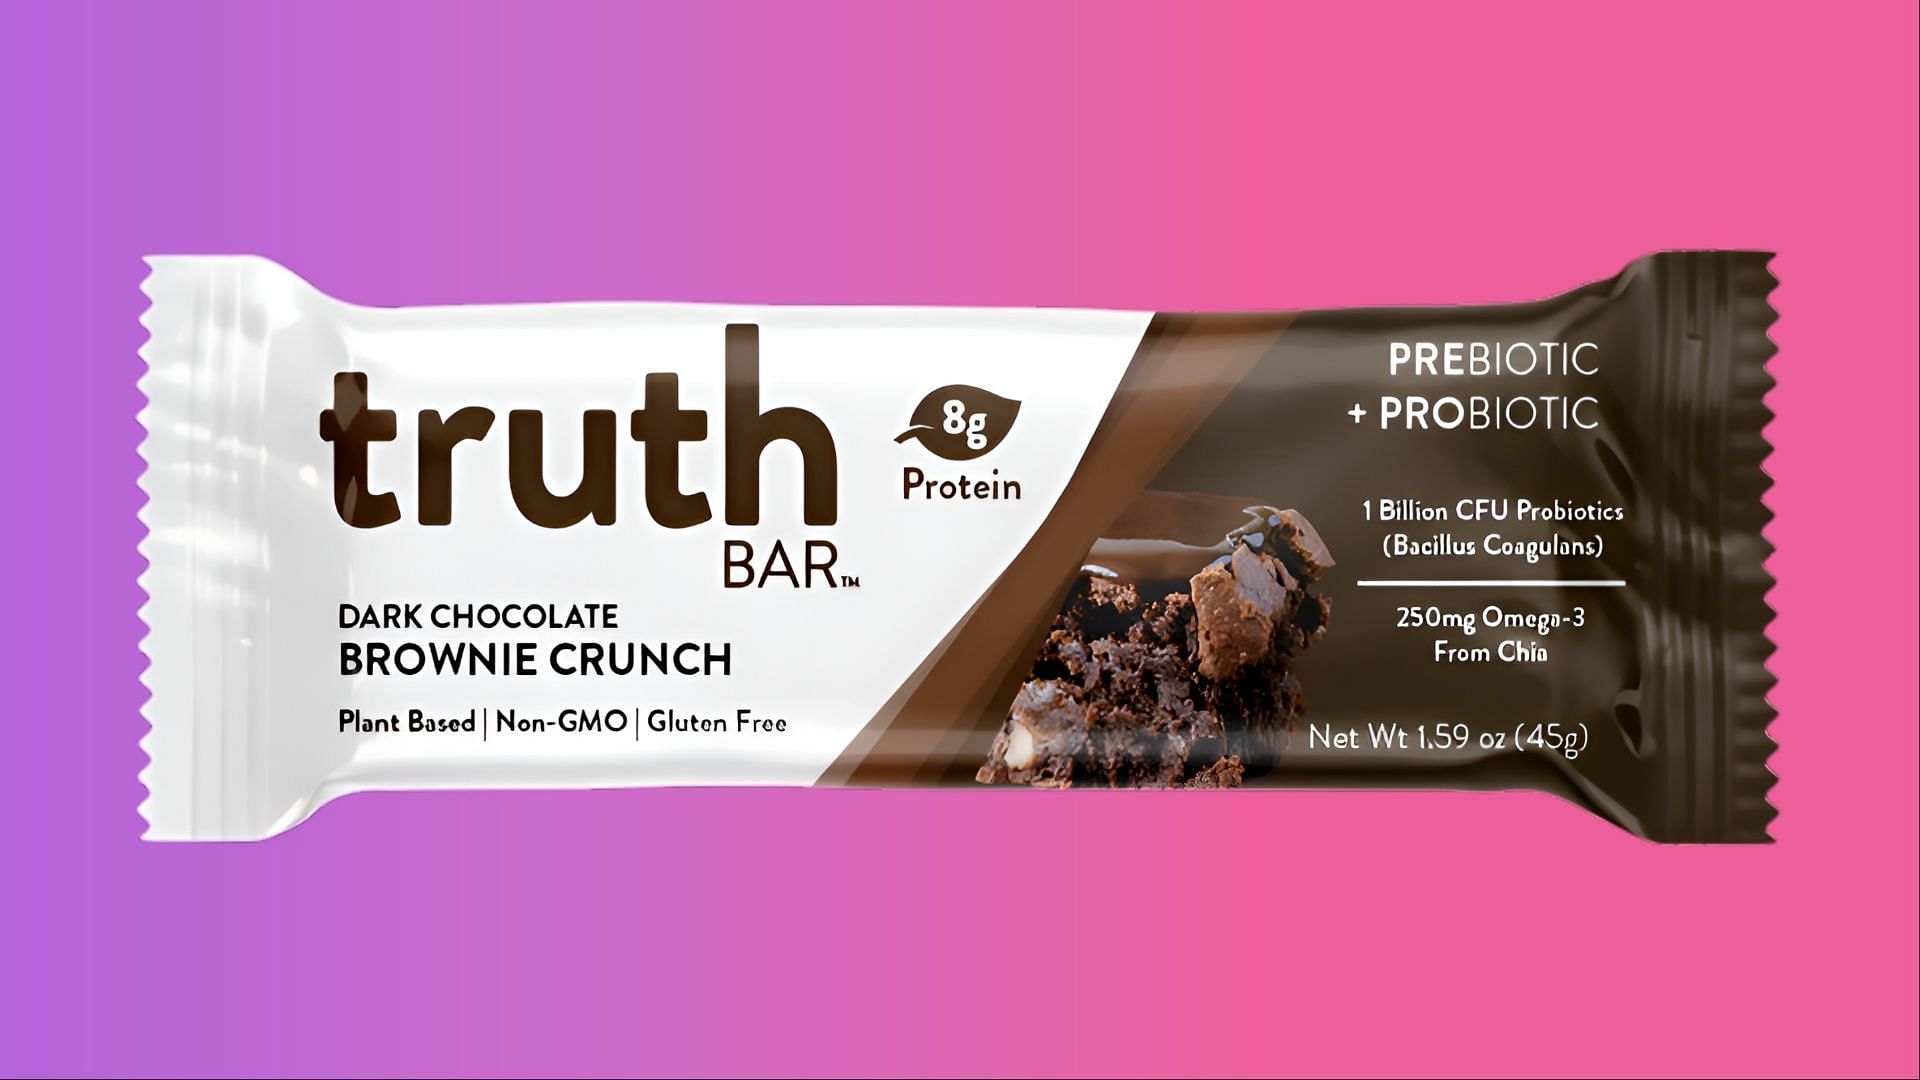 The Dark Chocolate Brownie Crunch bars are available at Walmart and Wegmans (Image via Truth Bar)